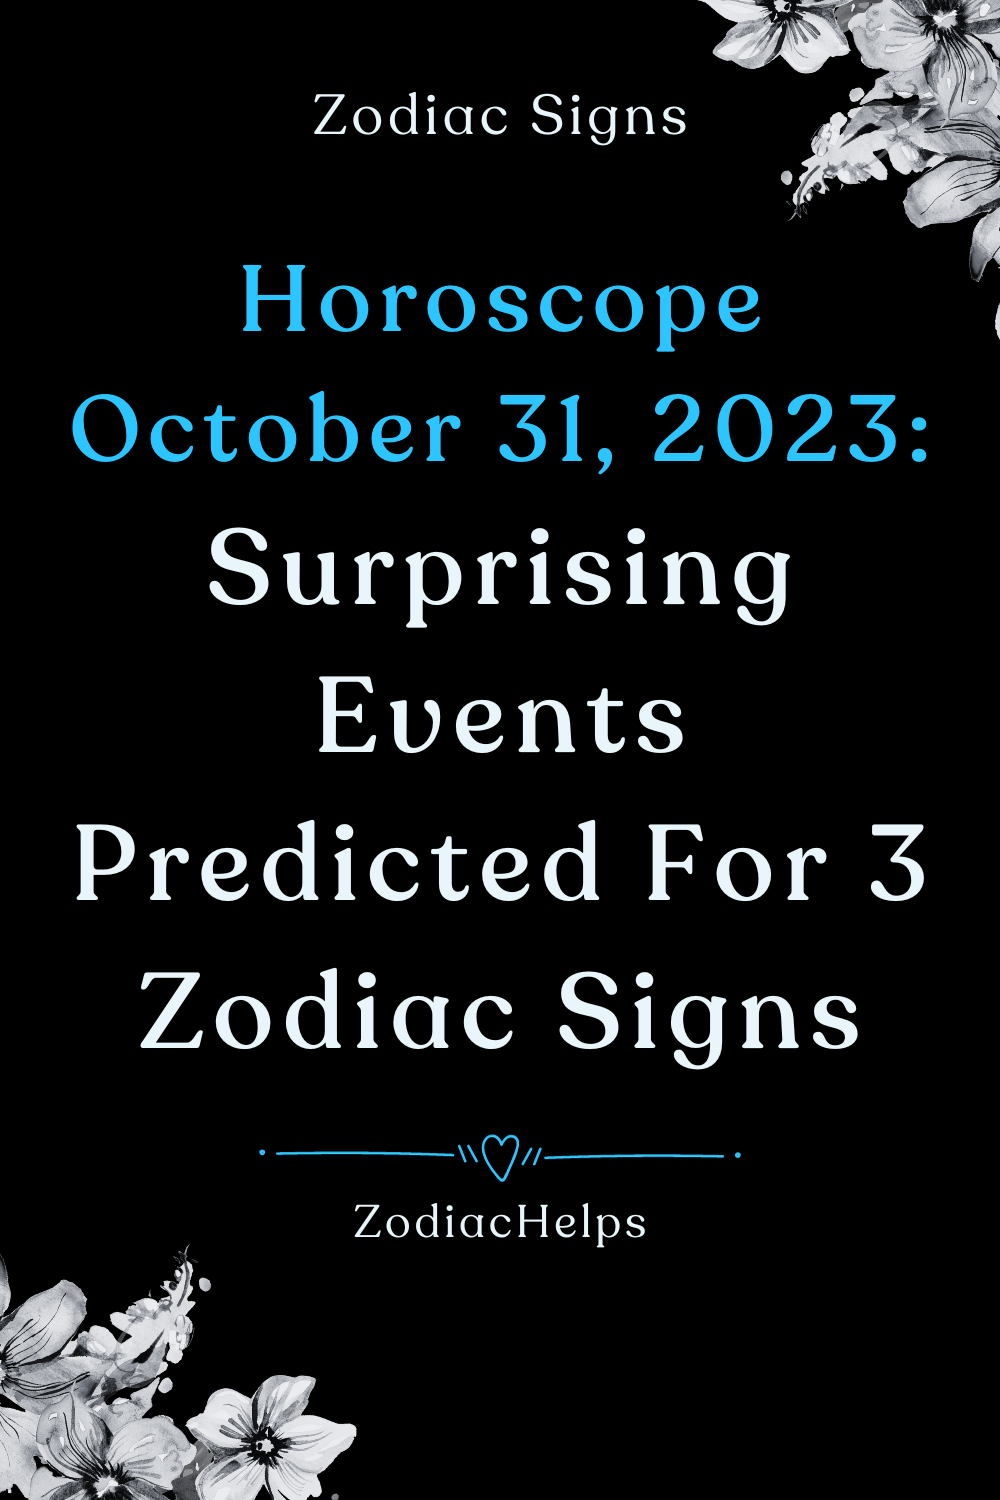 Horoscope October 31, 2023: Surprising Events Predicted For 3 Zodiac Signs